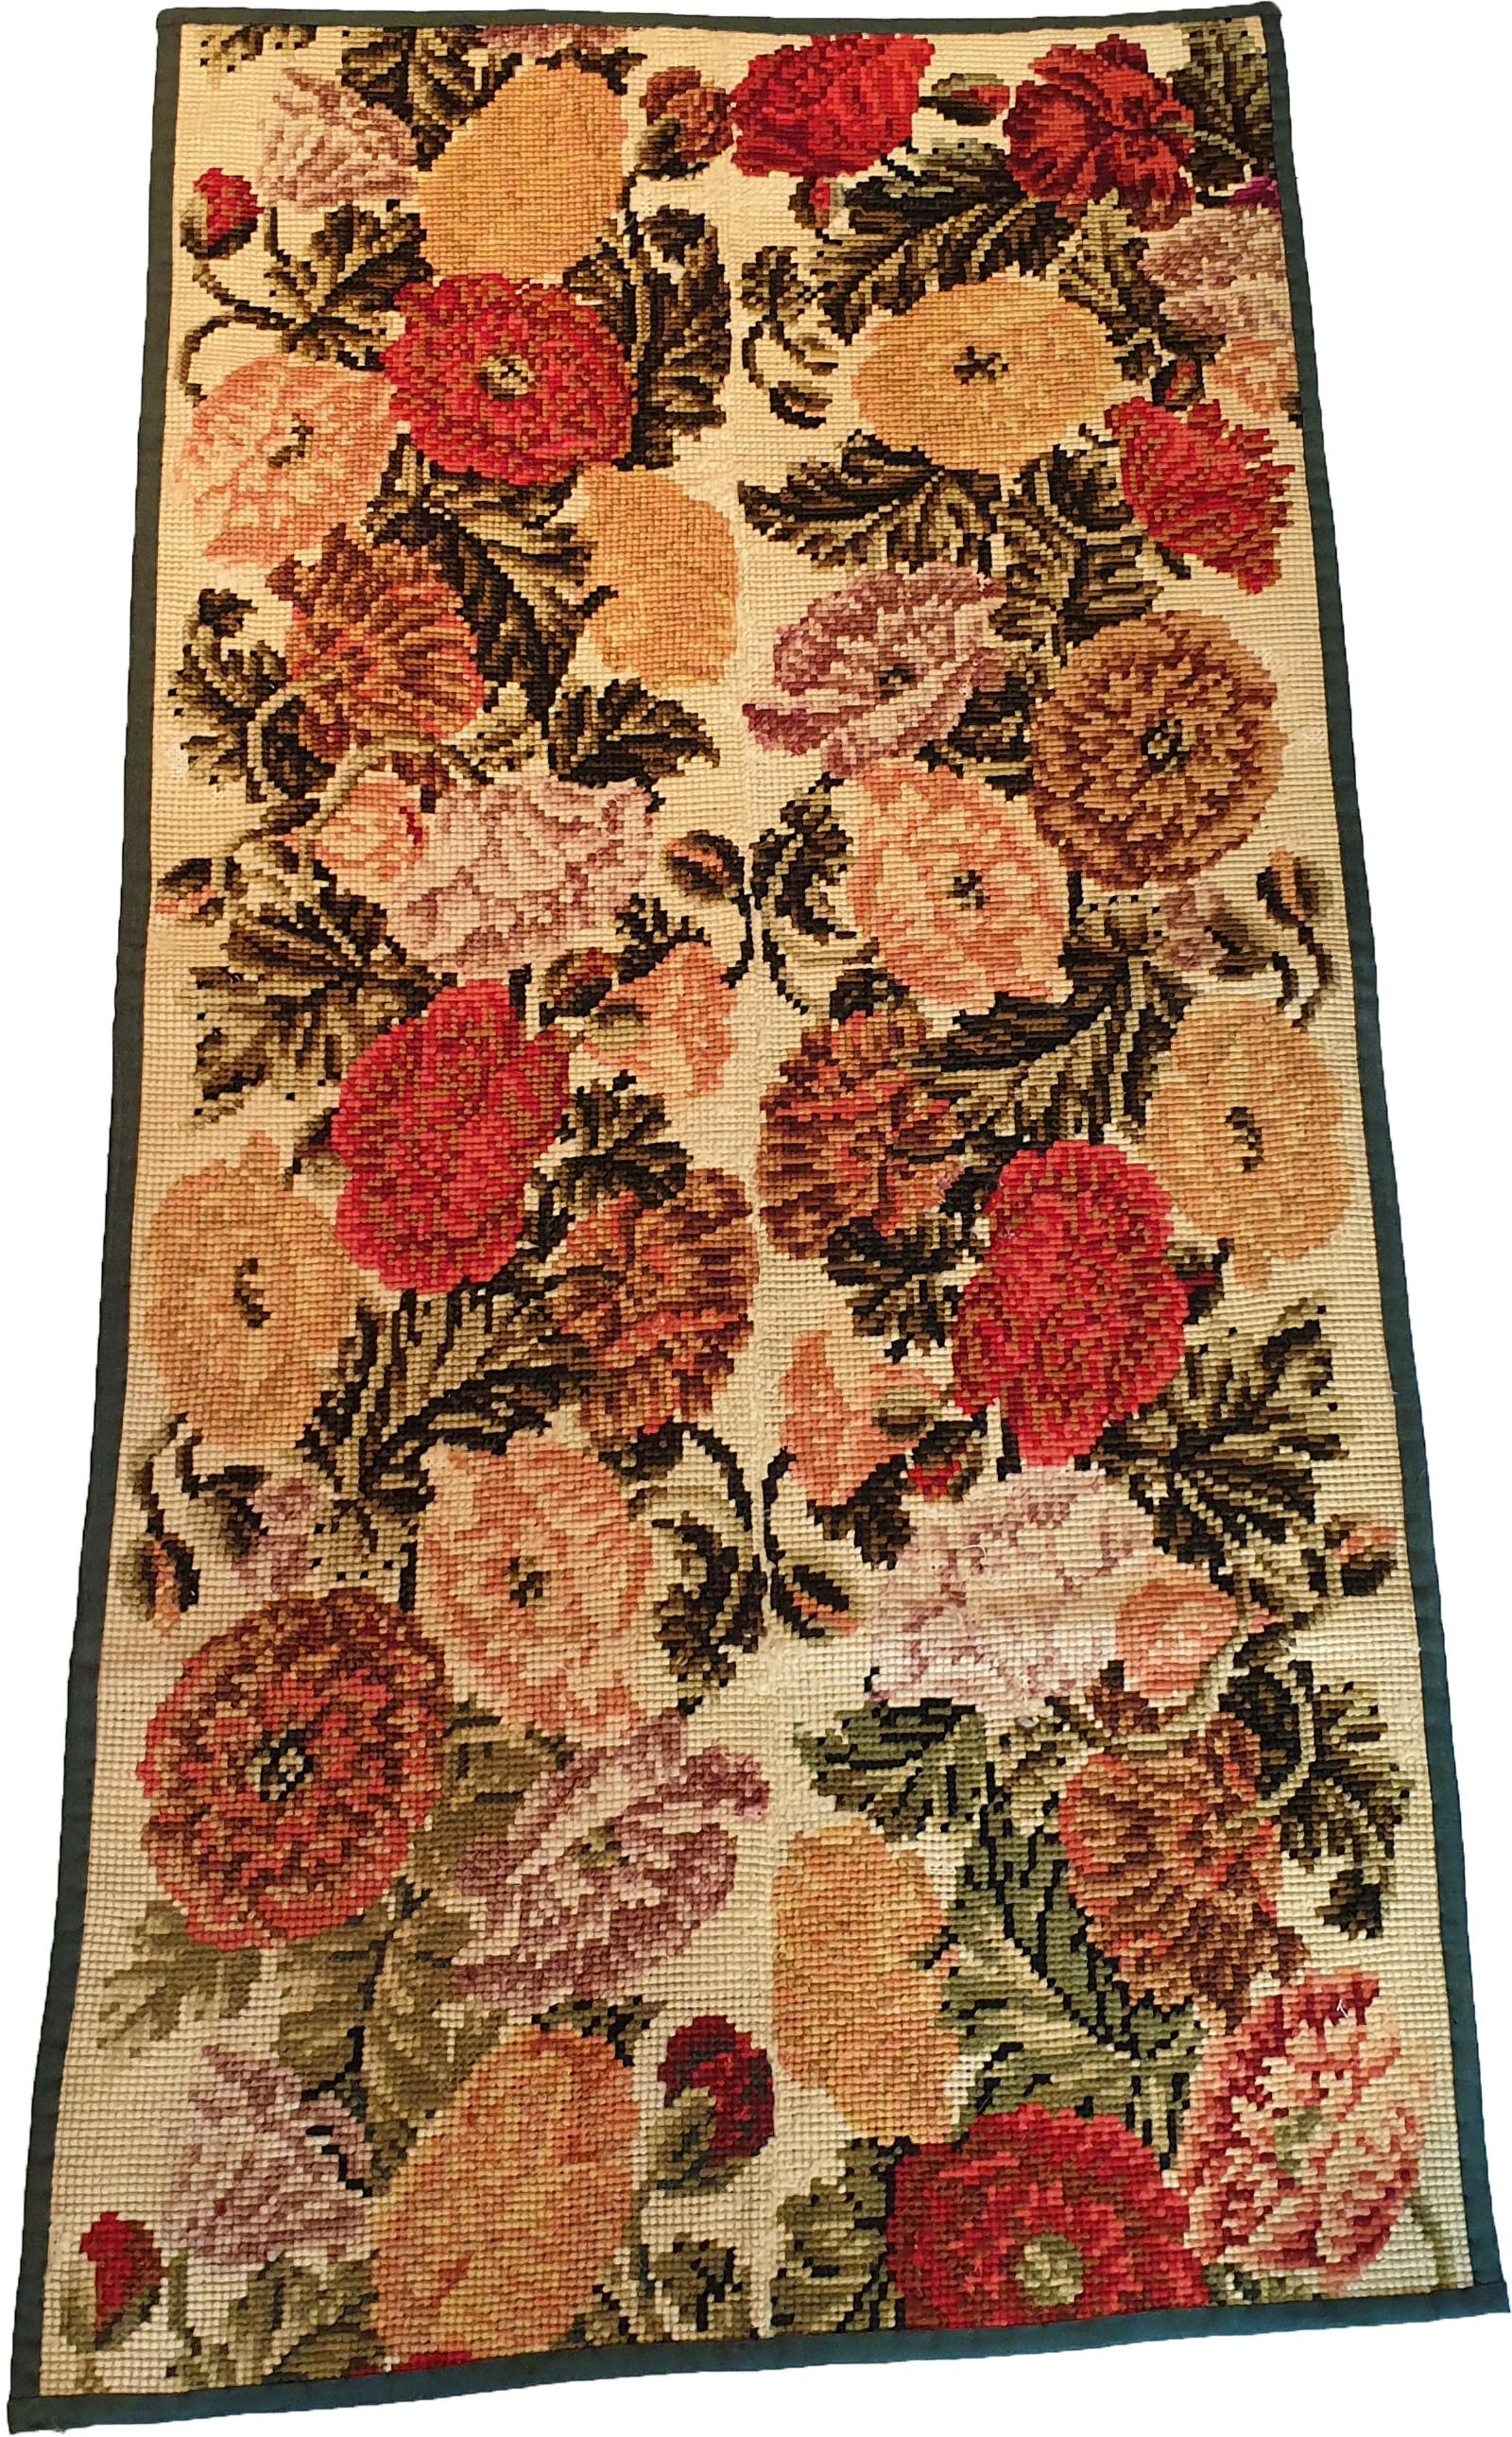 Textile of the Royal Manufacture of Aubusson of the 19th century.
Representation of some flowers.
Perfect state of preservation.
Reinforced by a fabric on the back of the work

Dimension: 135 cm x 70 cm.
 